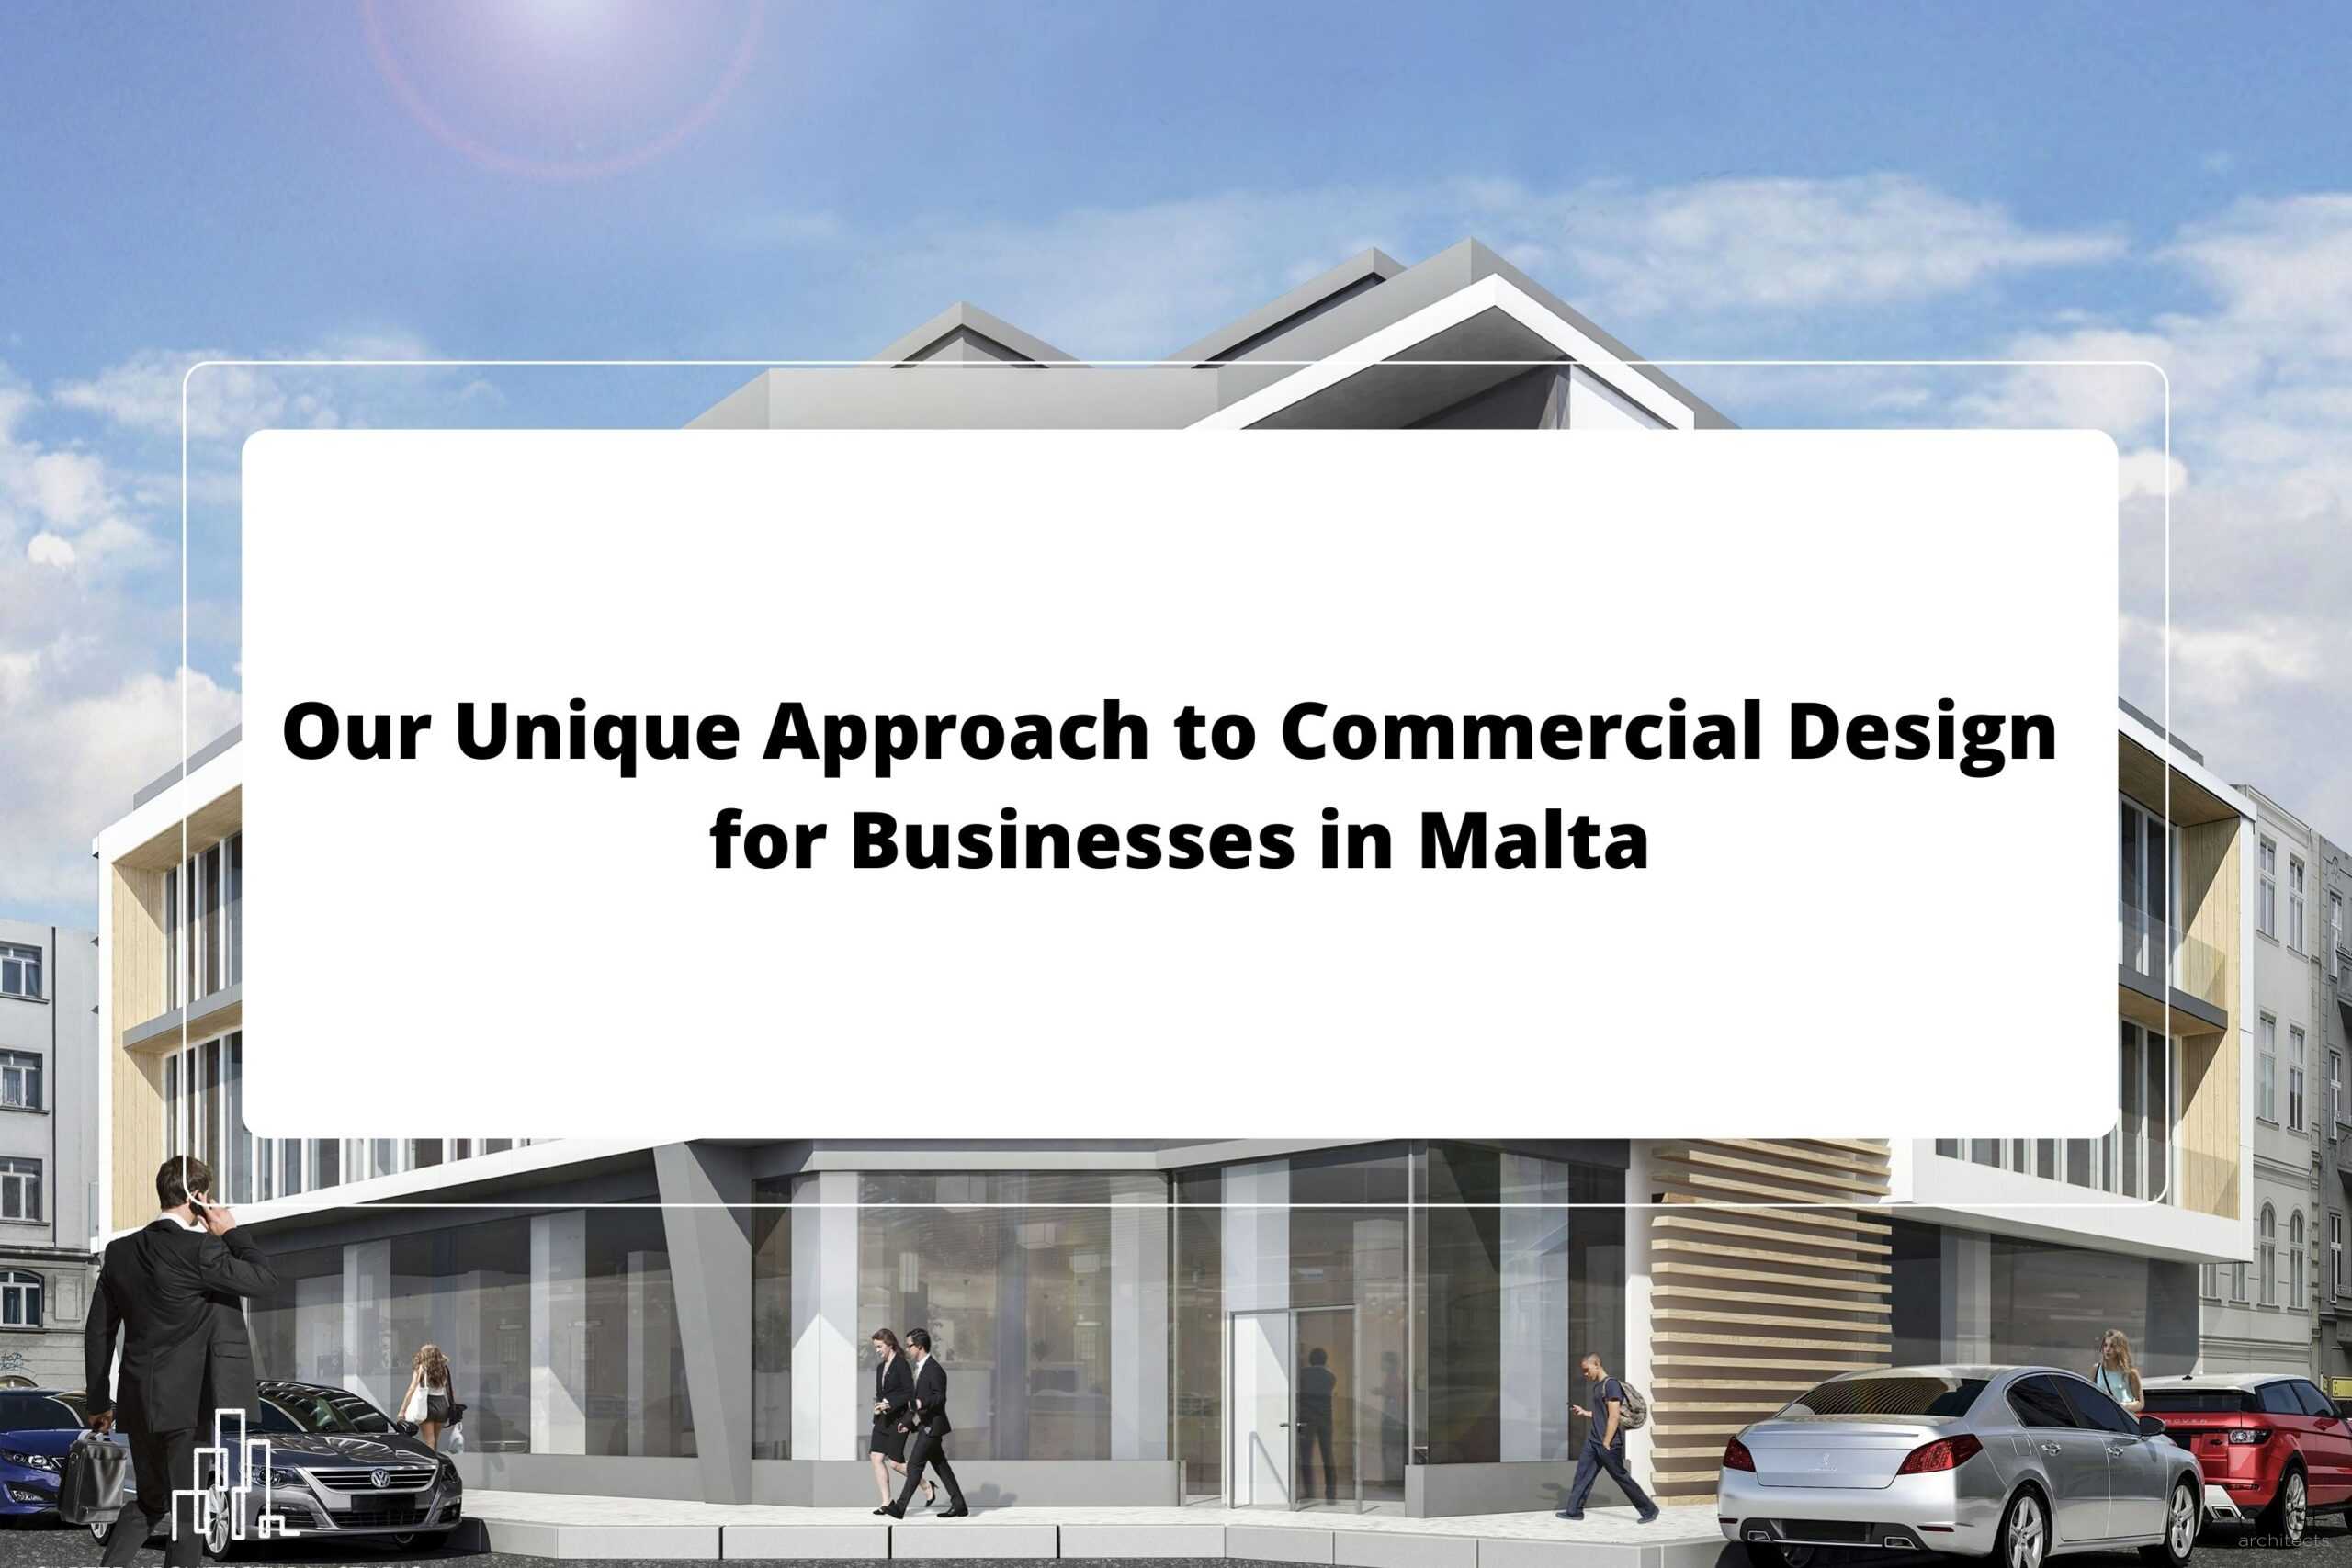 Our Unique Approach to Commercial Design for Businesses in Malta